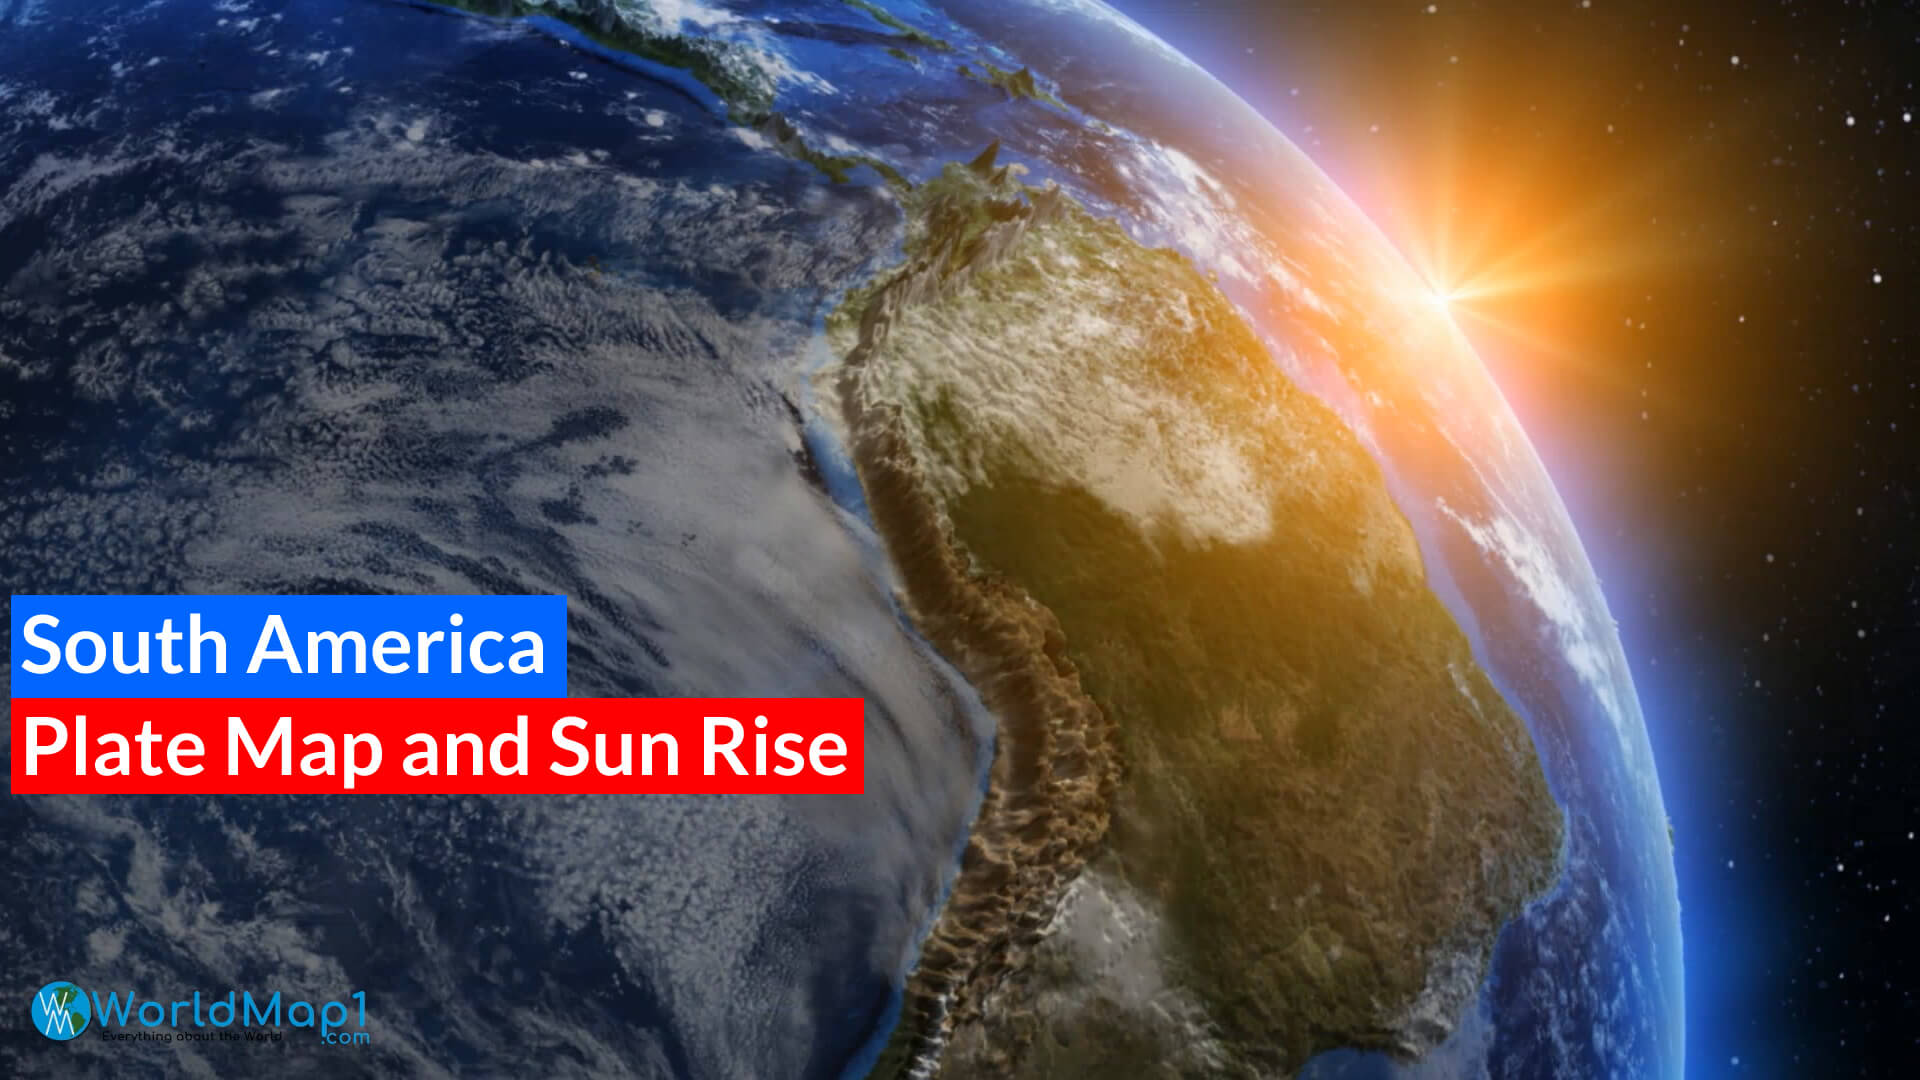 South America Plate Map and Sun Rise